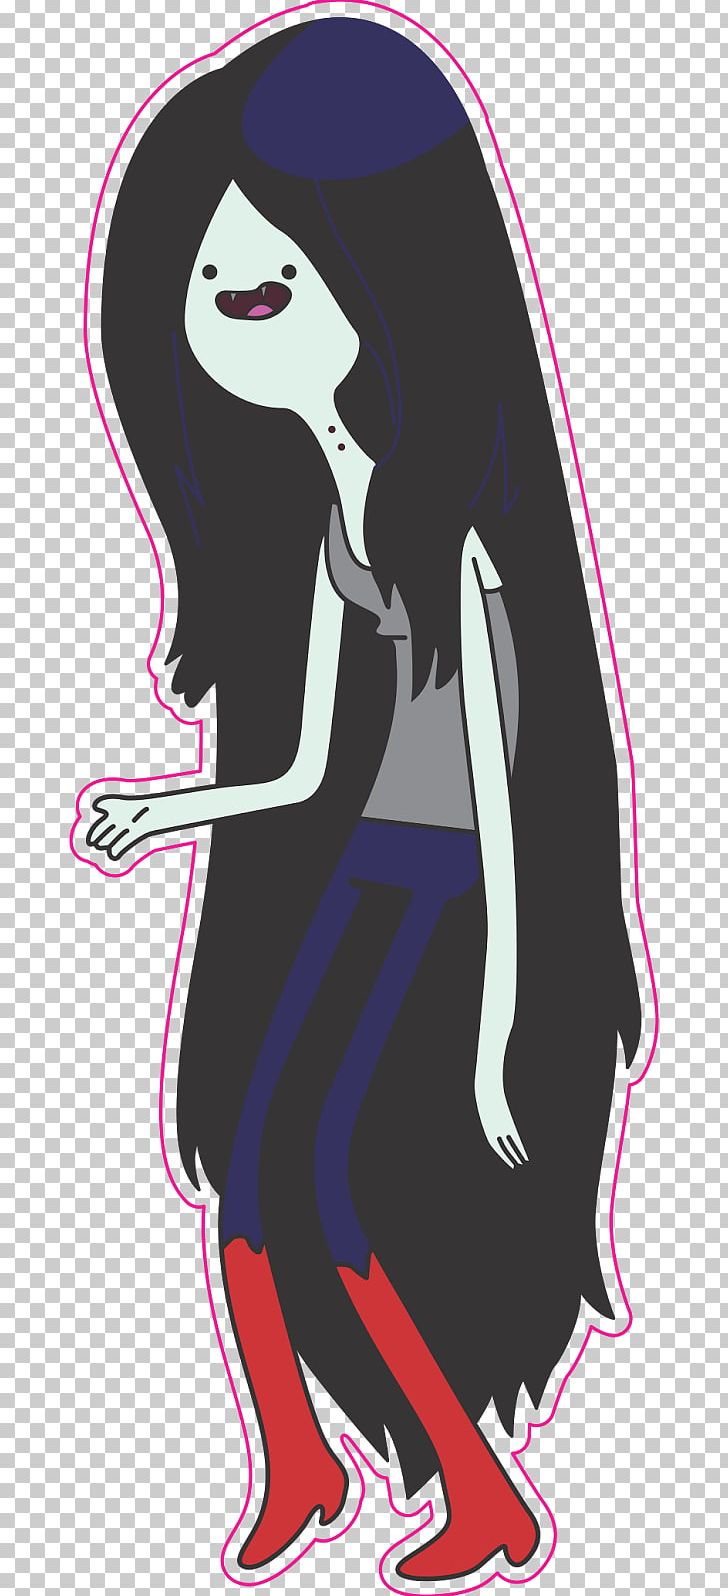 Marceline The Vampire Queen Princess Bubblegum Finn The Human Jake The Dog Ice King PNG, Clipart, Adventure Time, Art, Cartoon, Character, Drawing Free PNG Download